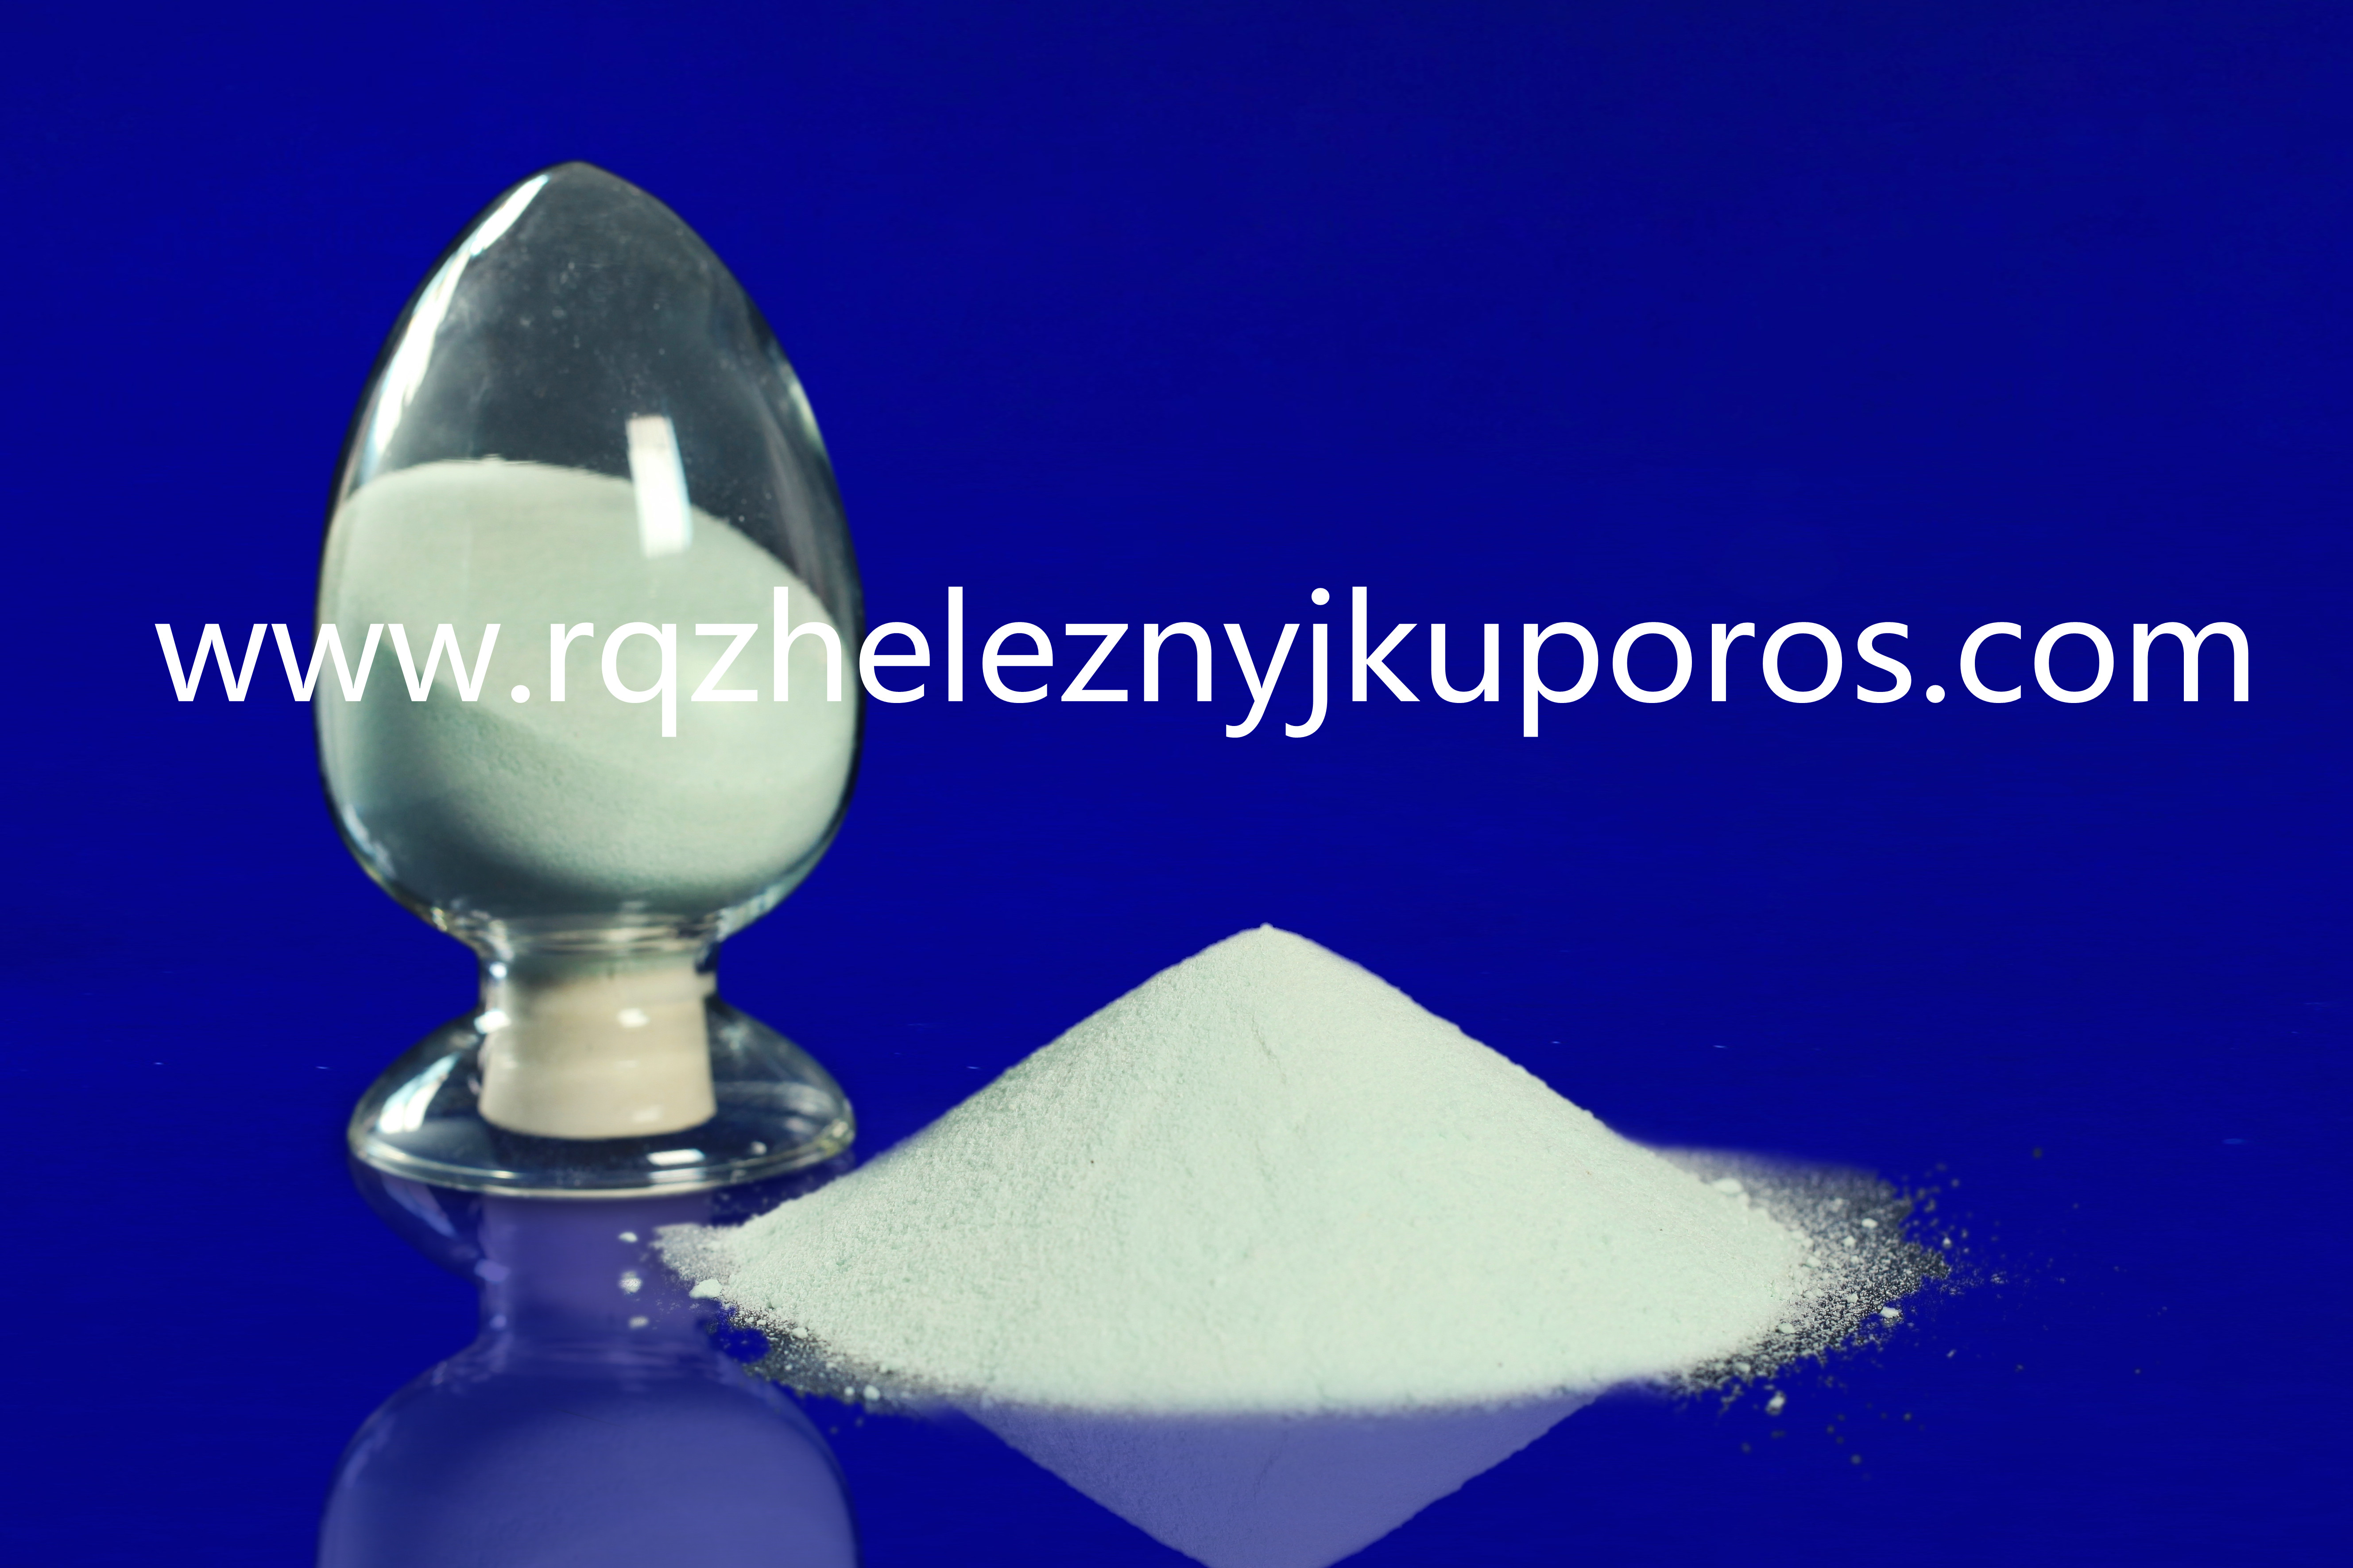 Iron Sulphate Heptahydrate